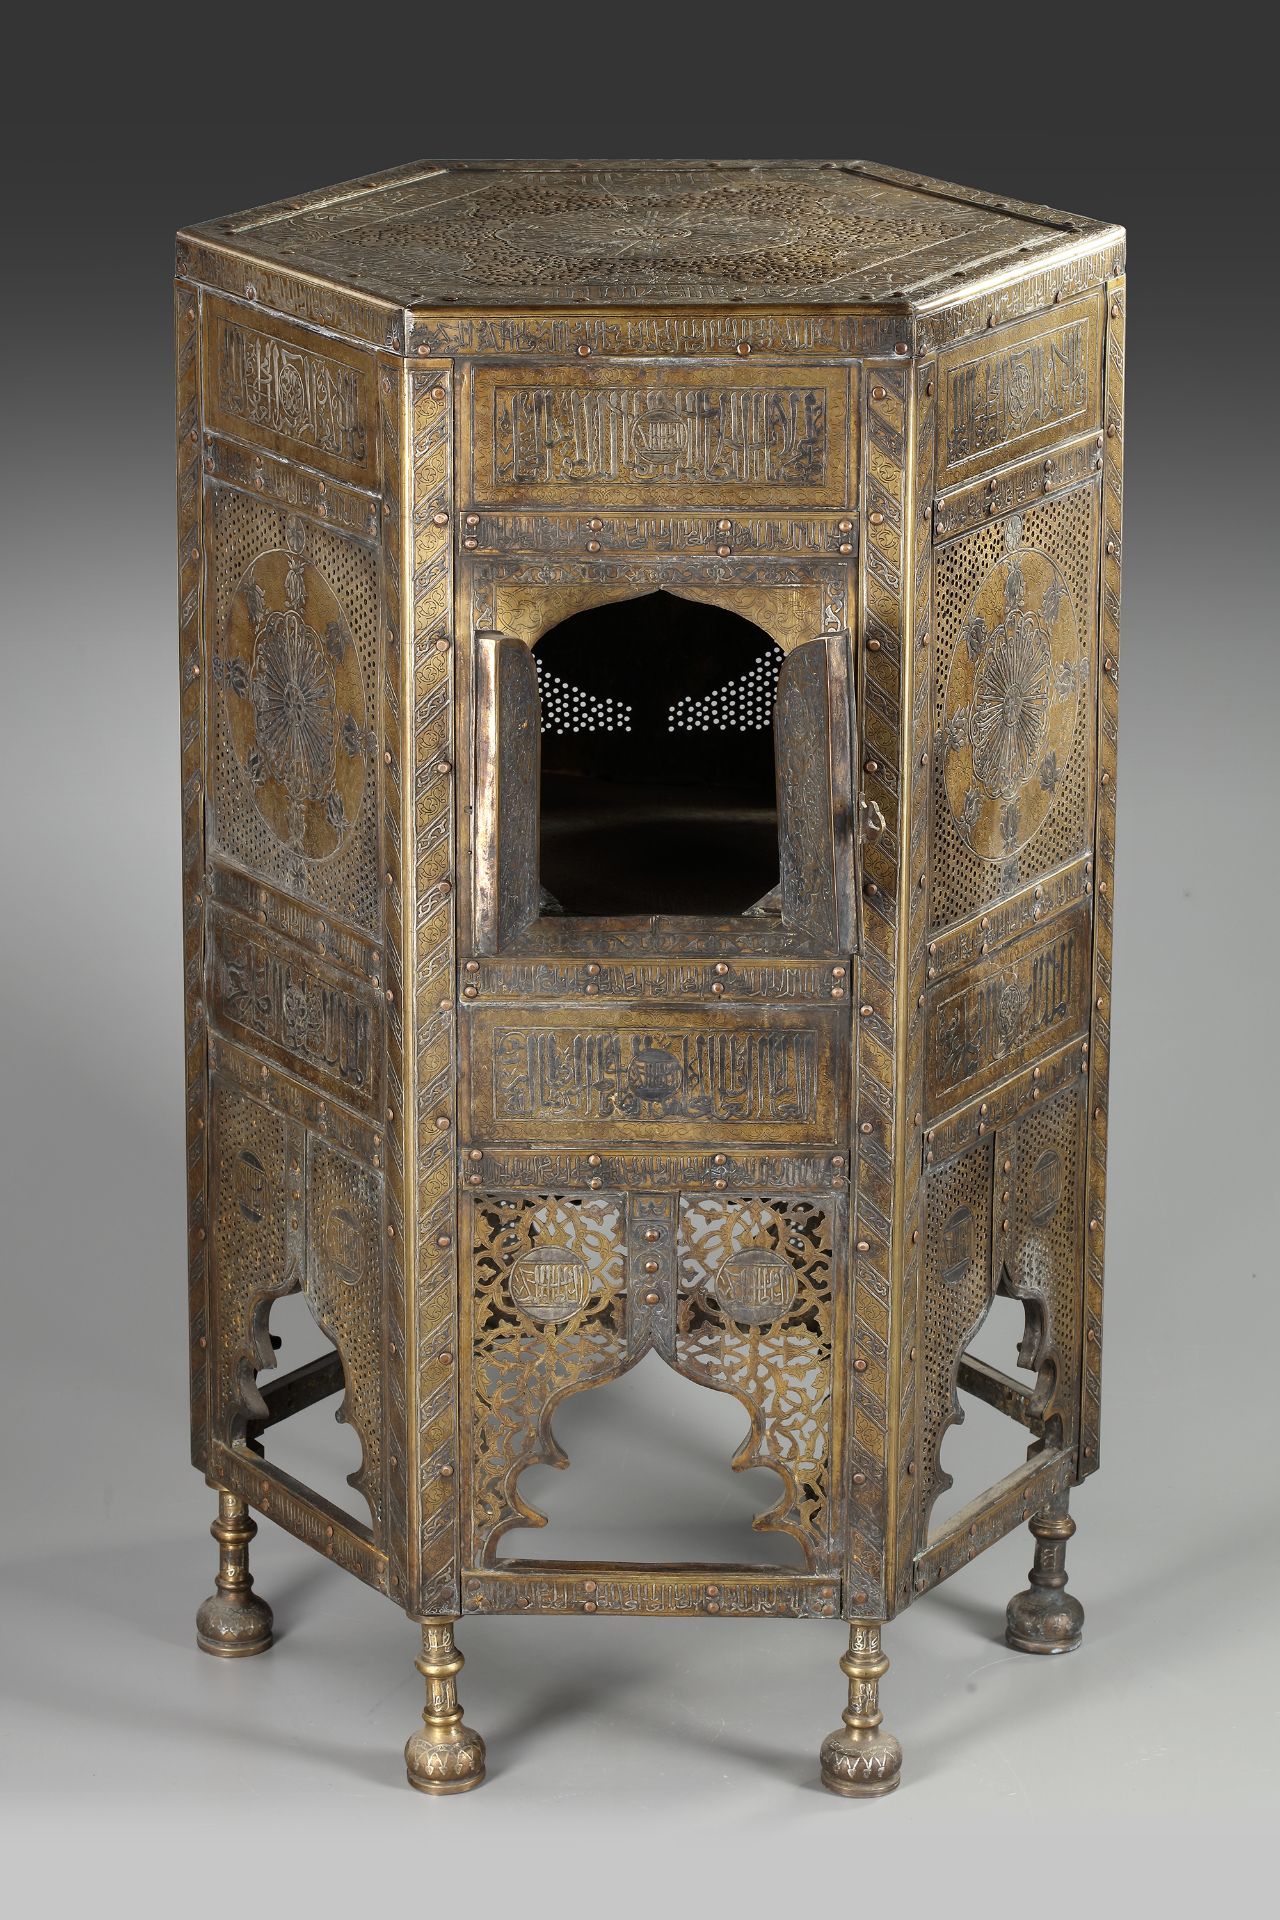 A LARGE CAIROWARE GOLD, SILVER AND COPPER INLAID BRASS KURSI, LATE 19TH CENTURY - Image 2 of 5